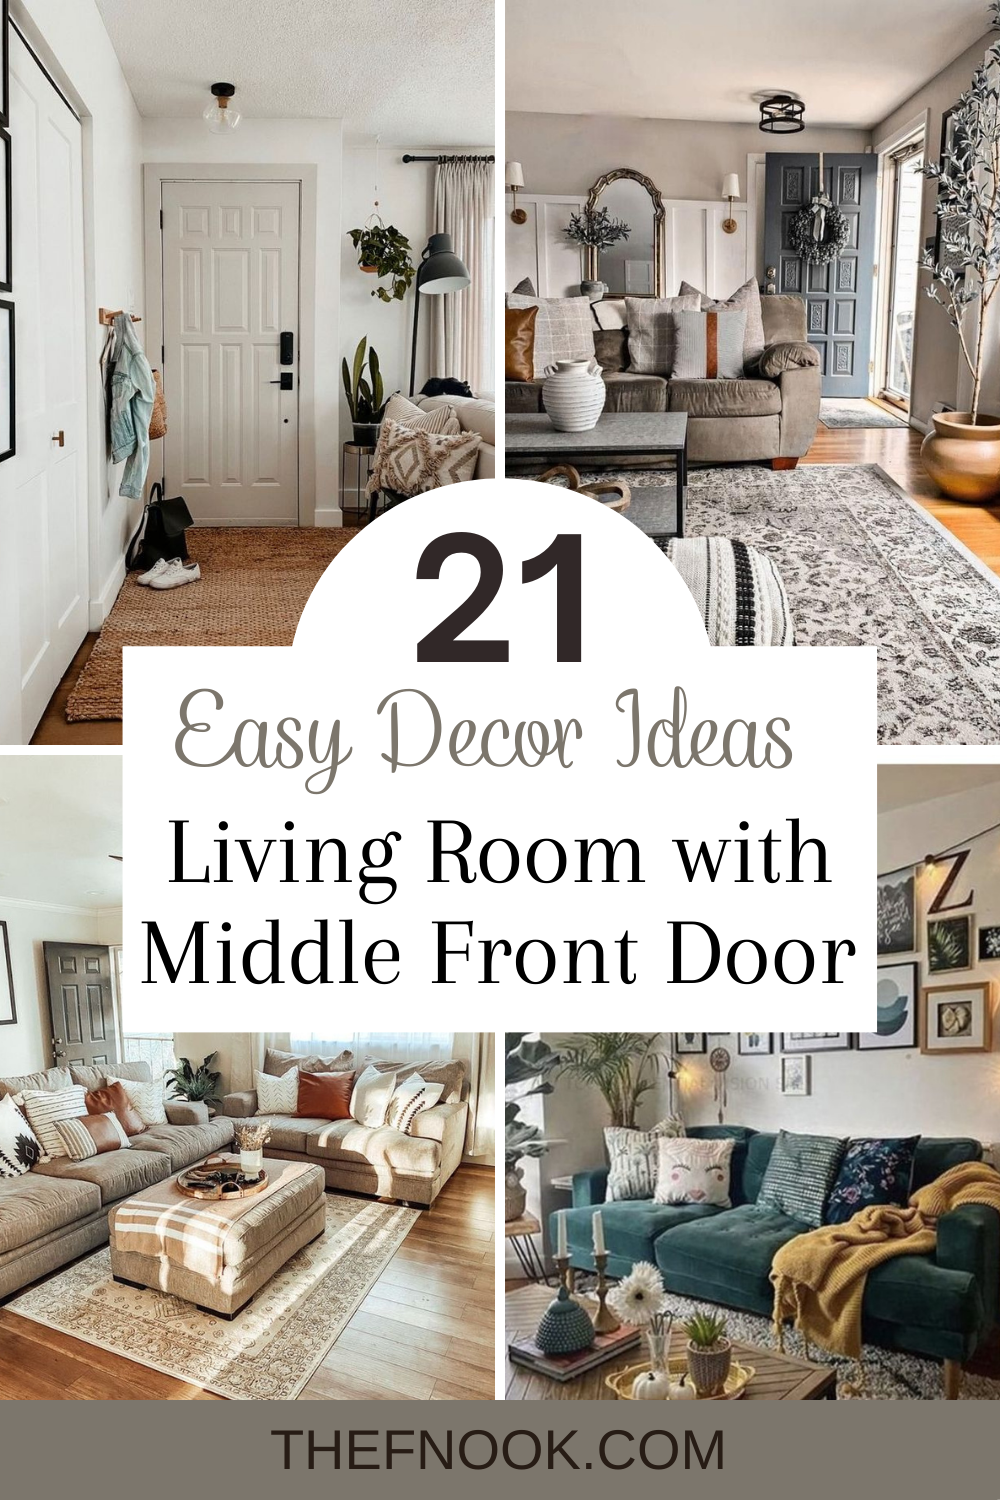 21 Easy Decor Ideas for a living room with a middle front door